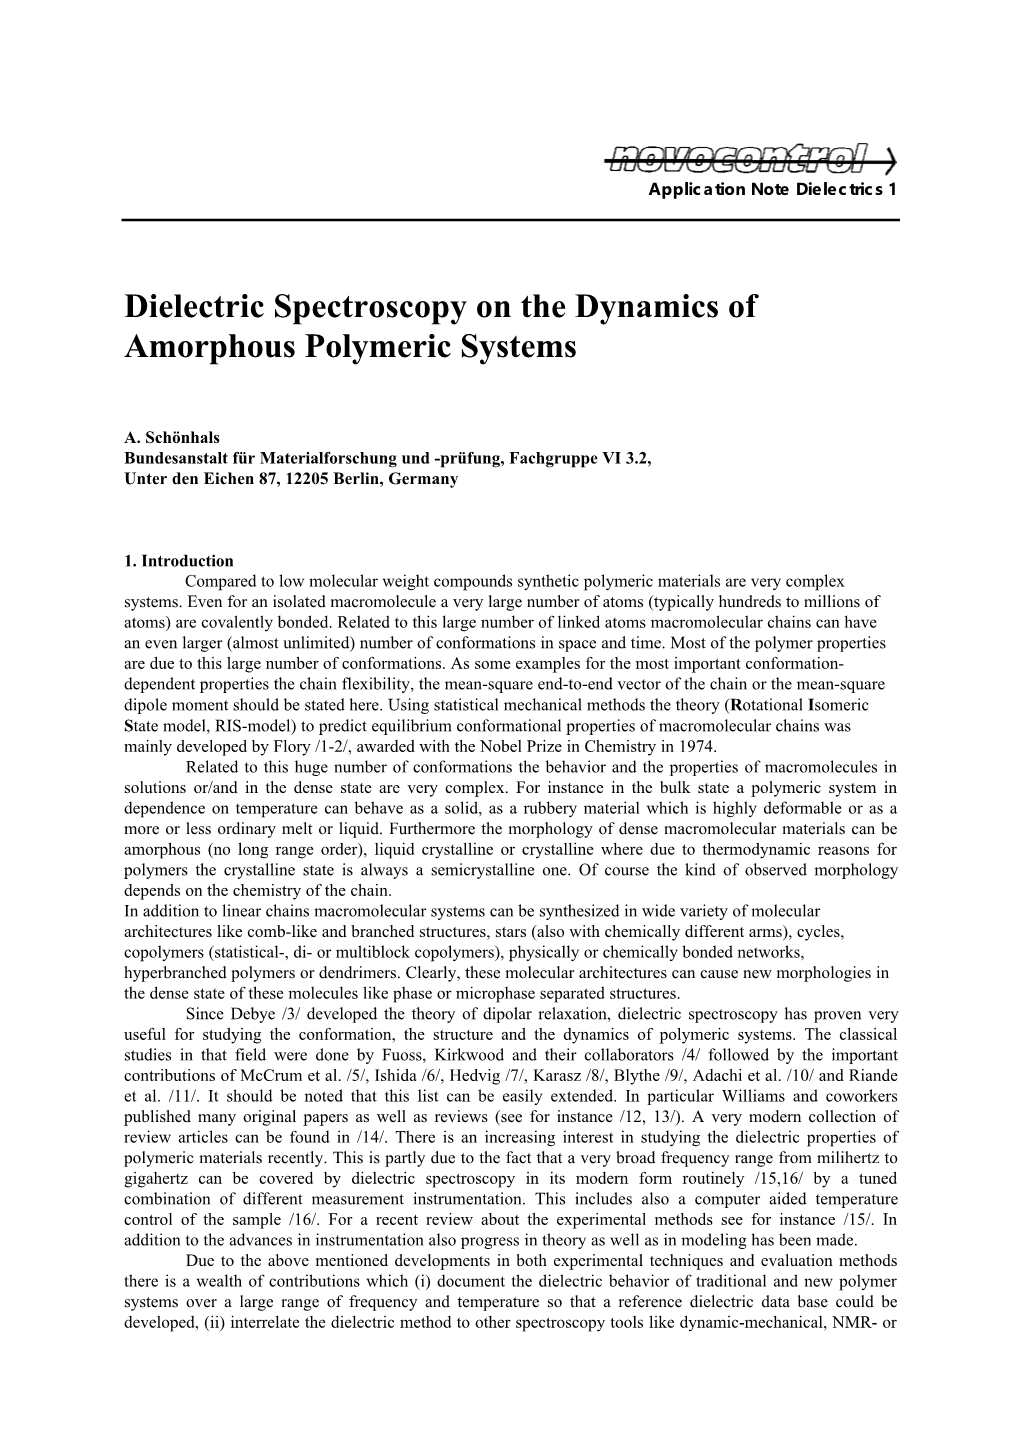 Dielectric Spectroscopy on the Dynamics of Amorphous Polymeric Systems